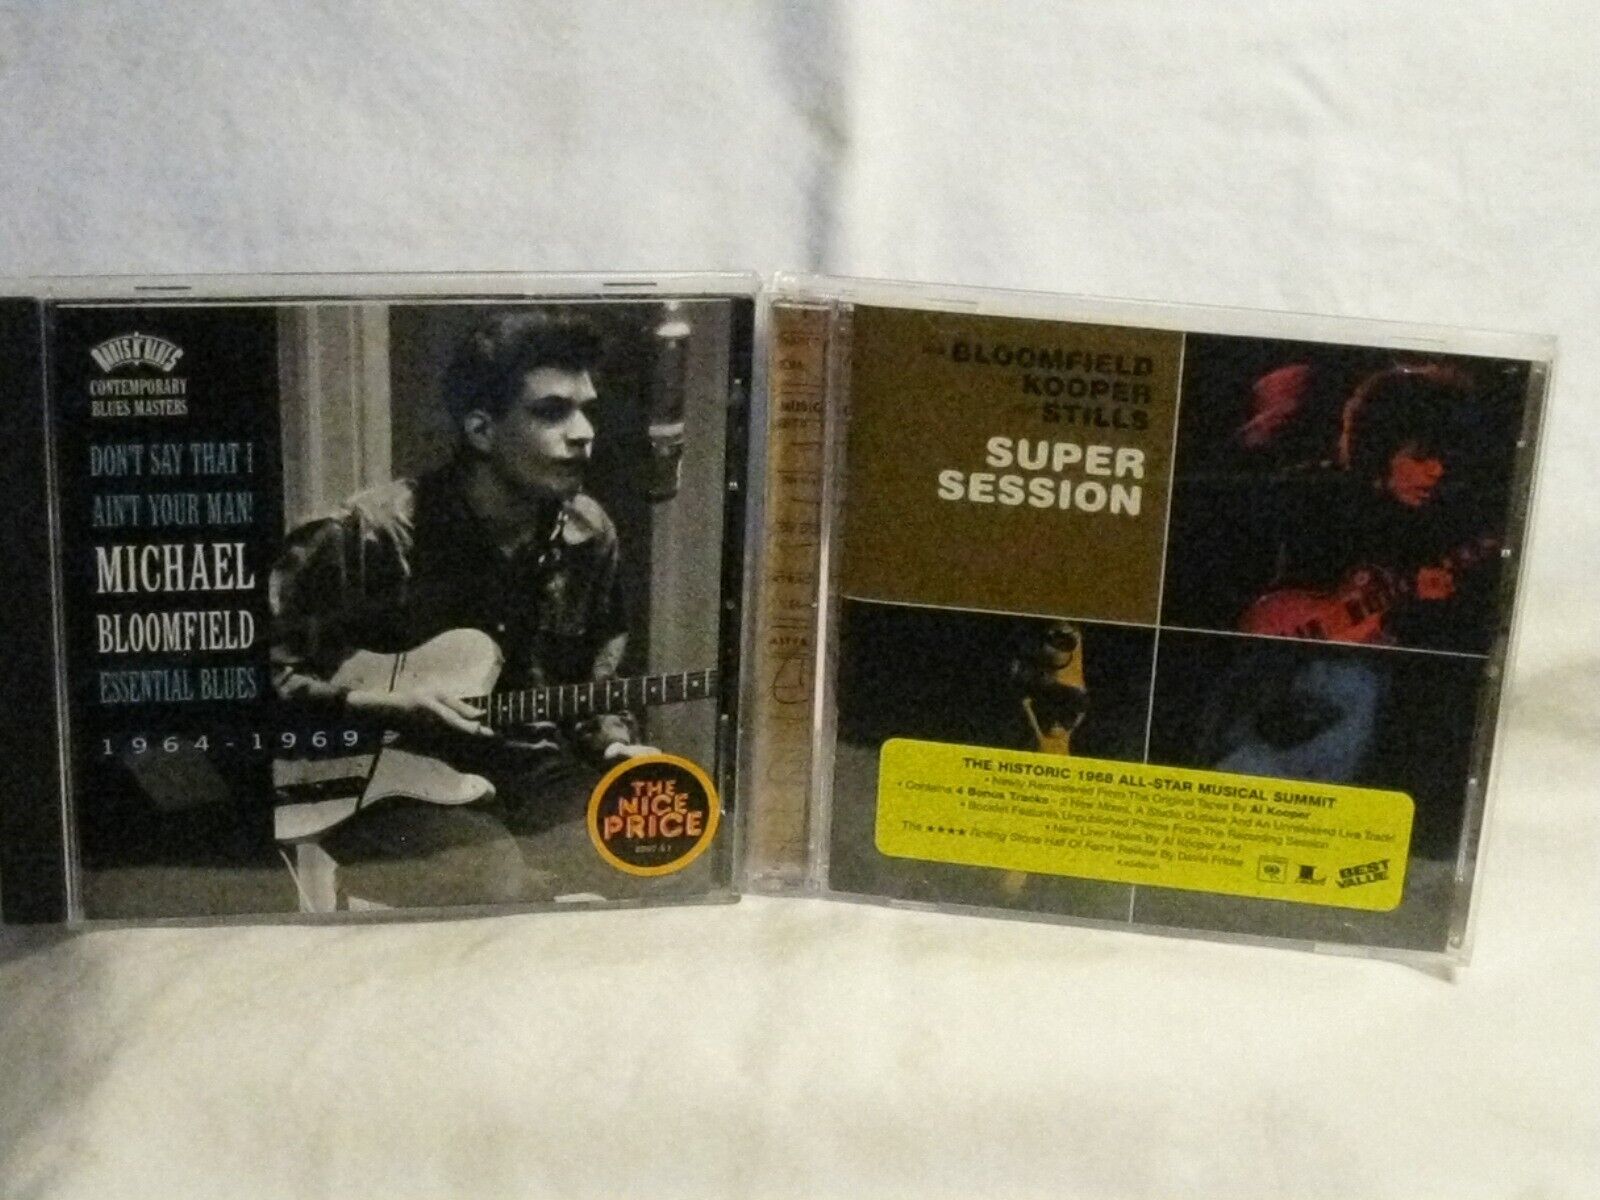 MIKE BLOOMFIELD 2 CD LOT "Essential Blues 1964-1969 + Super Session"